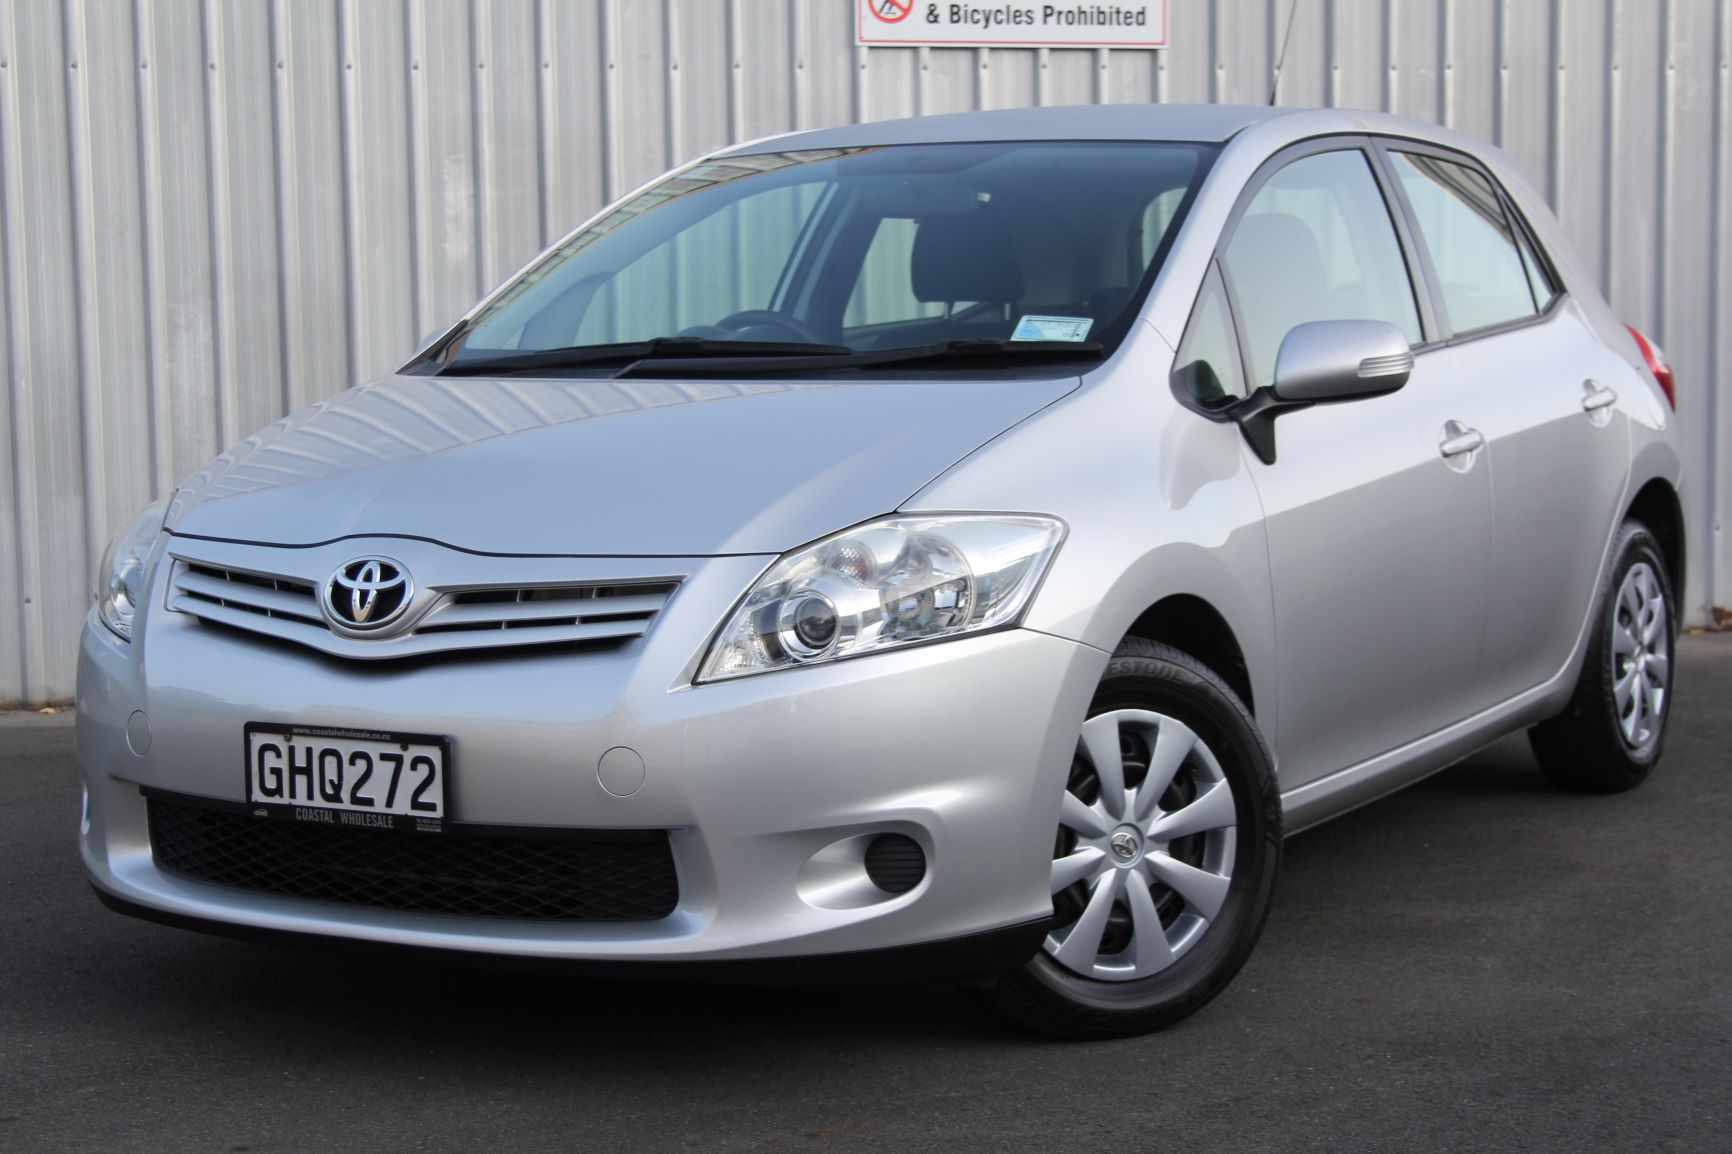 Toyota Corolla hatch 2012 for sale in Auckland